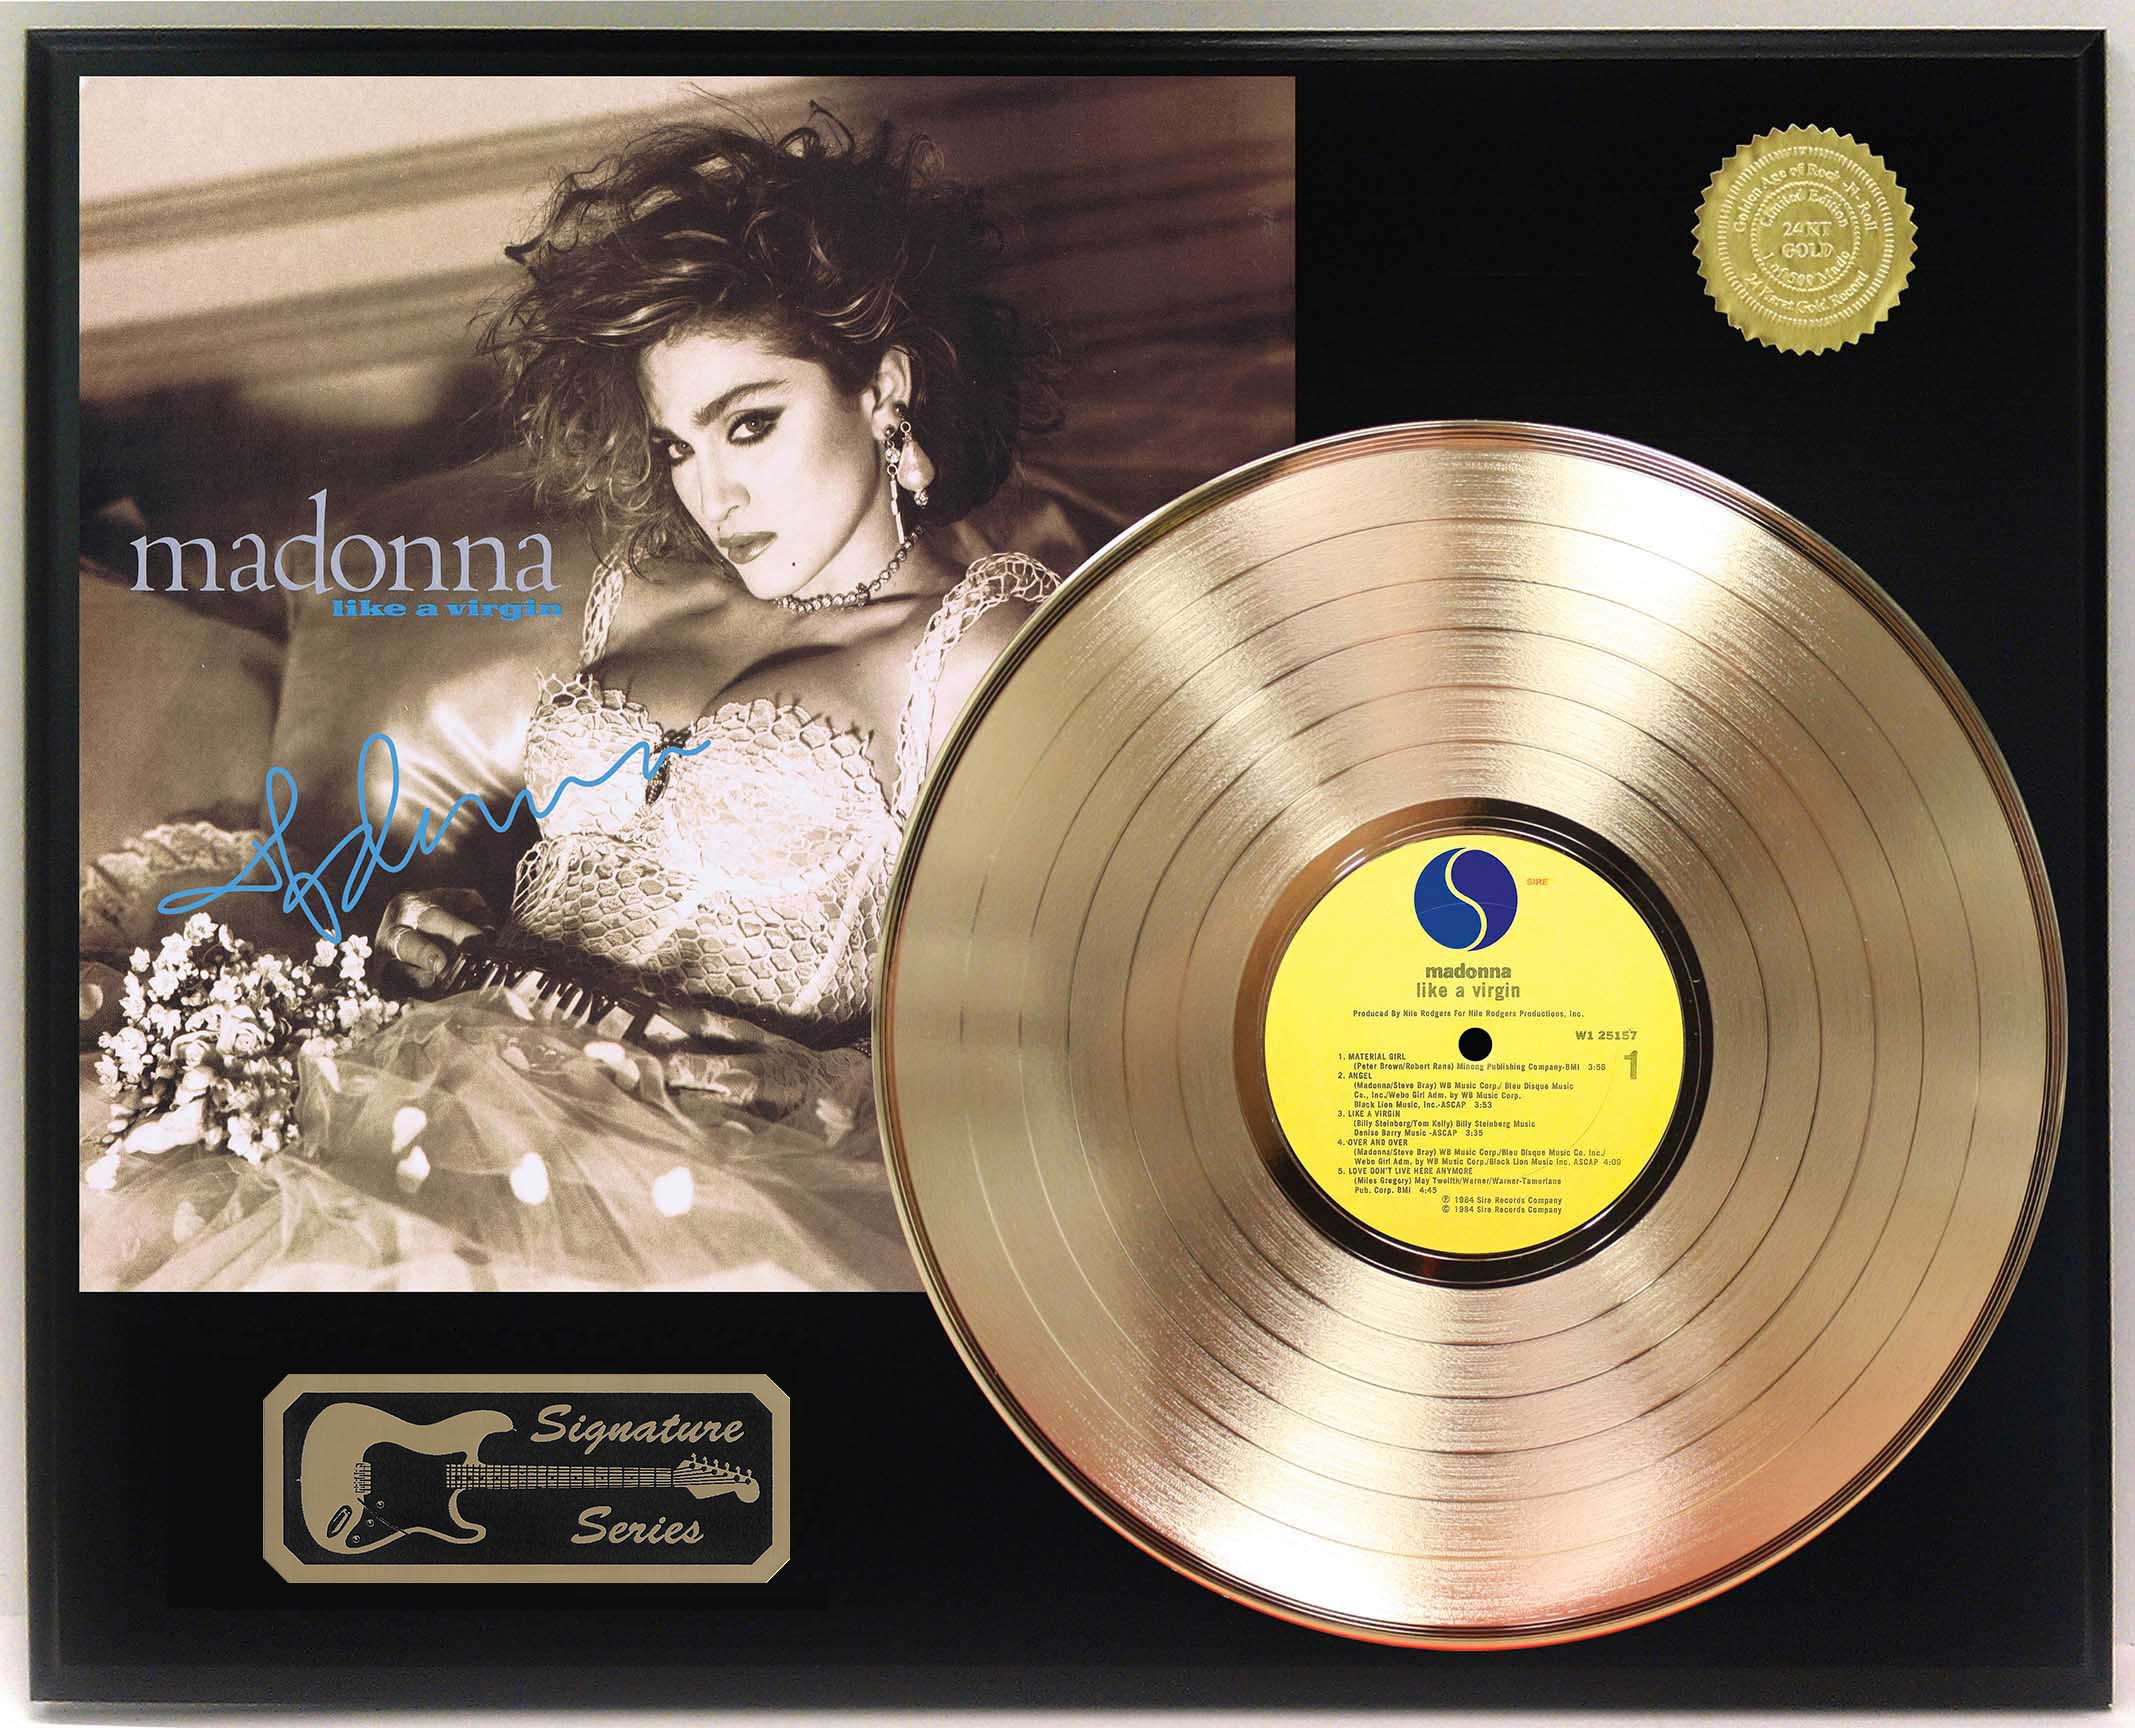 Buy Madonna Vinyl  New & Used Madonna Records for Sale